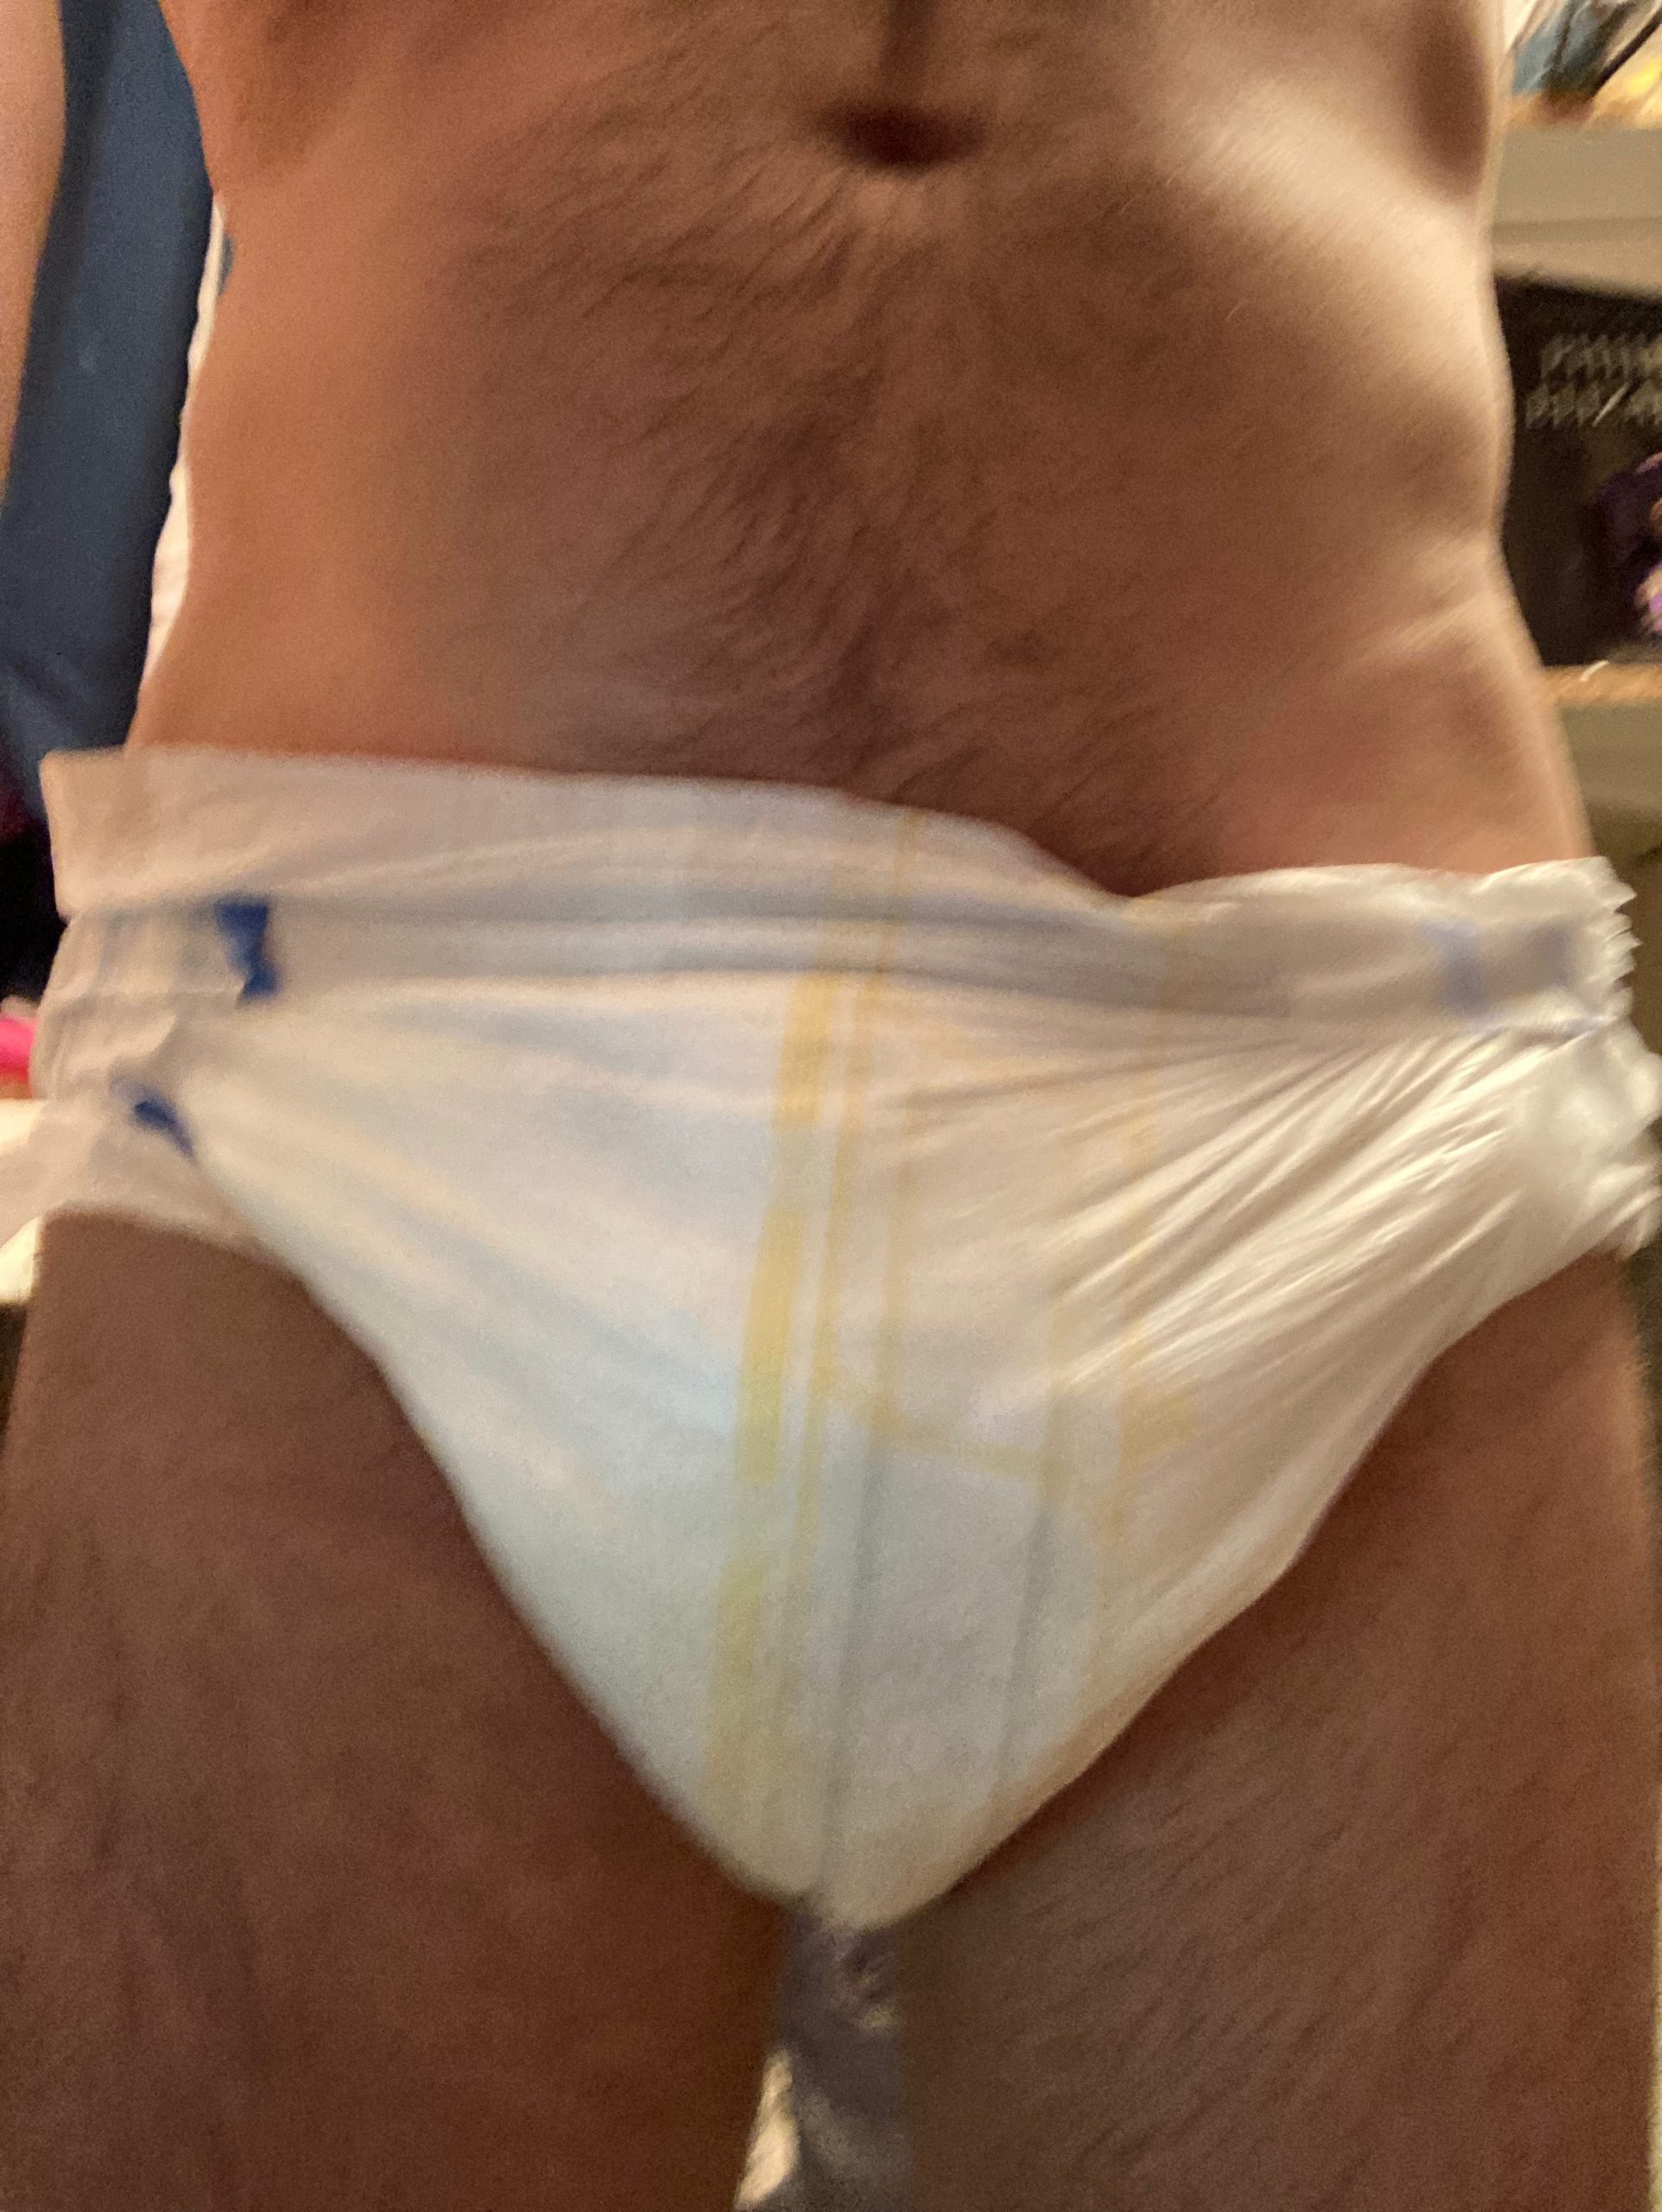 Bedwetting sissy cocksucker needs humiliation